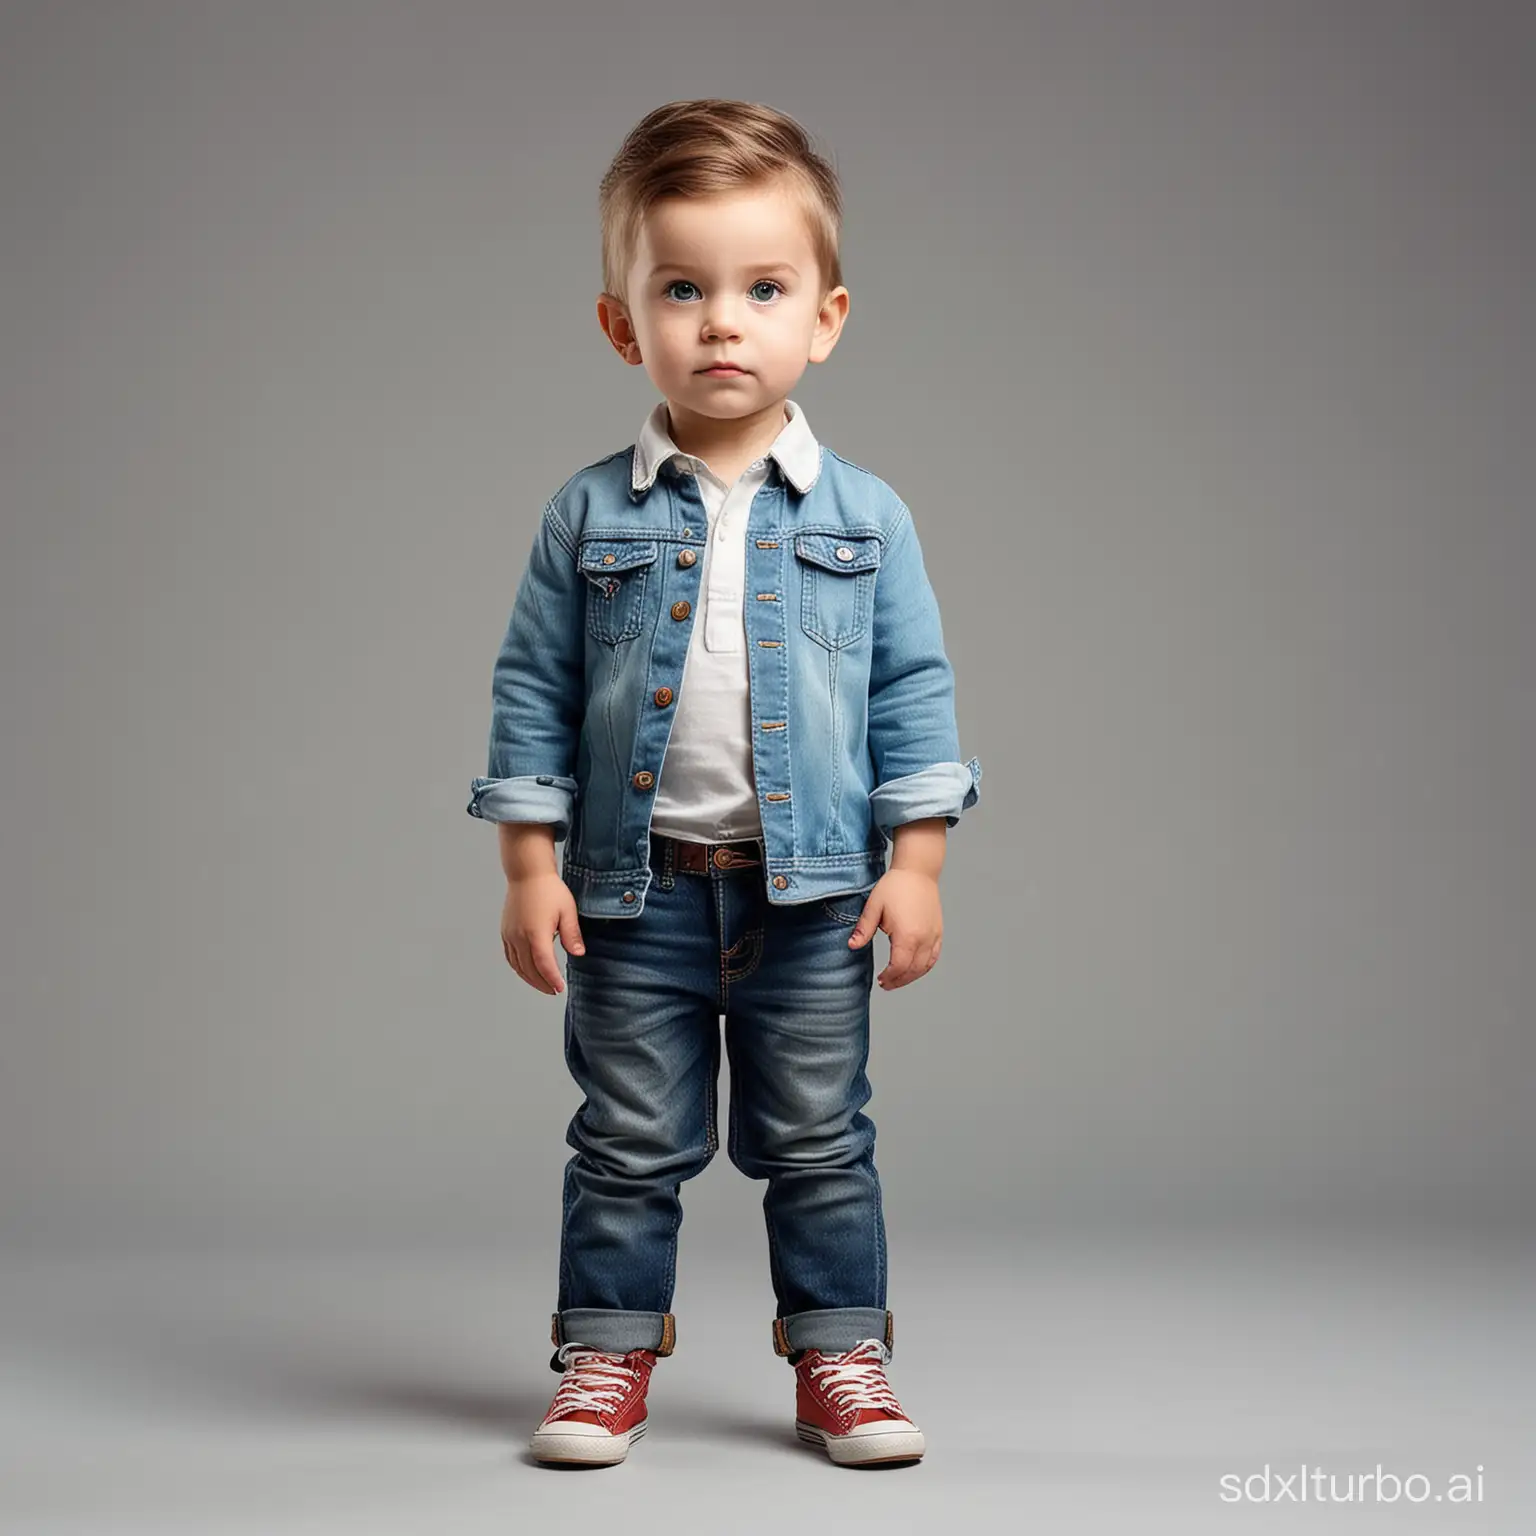 Little child fashion photographer, game character, stands at full height